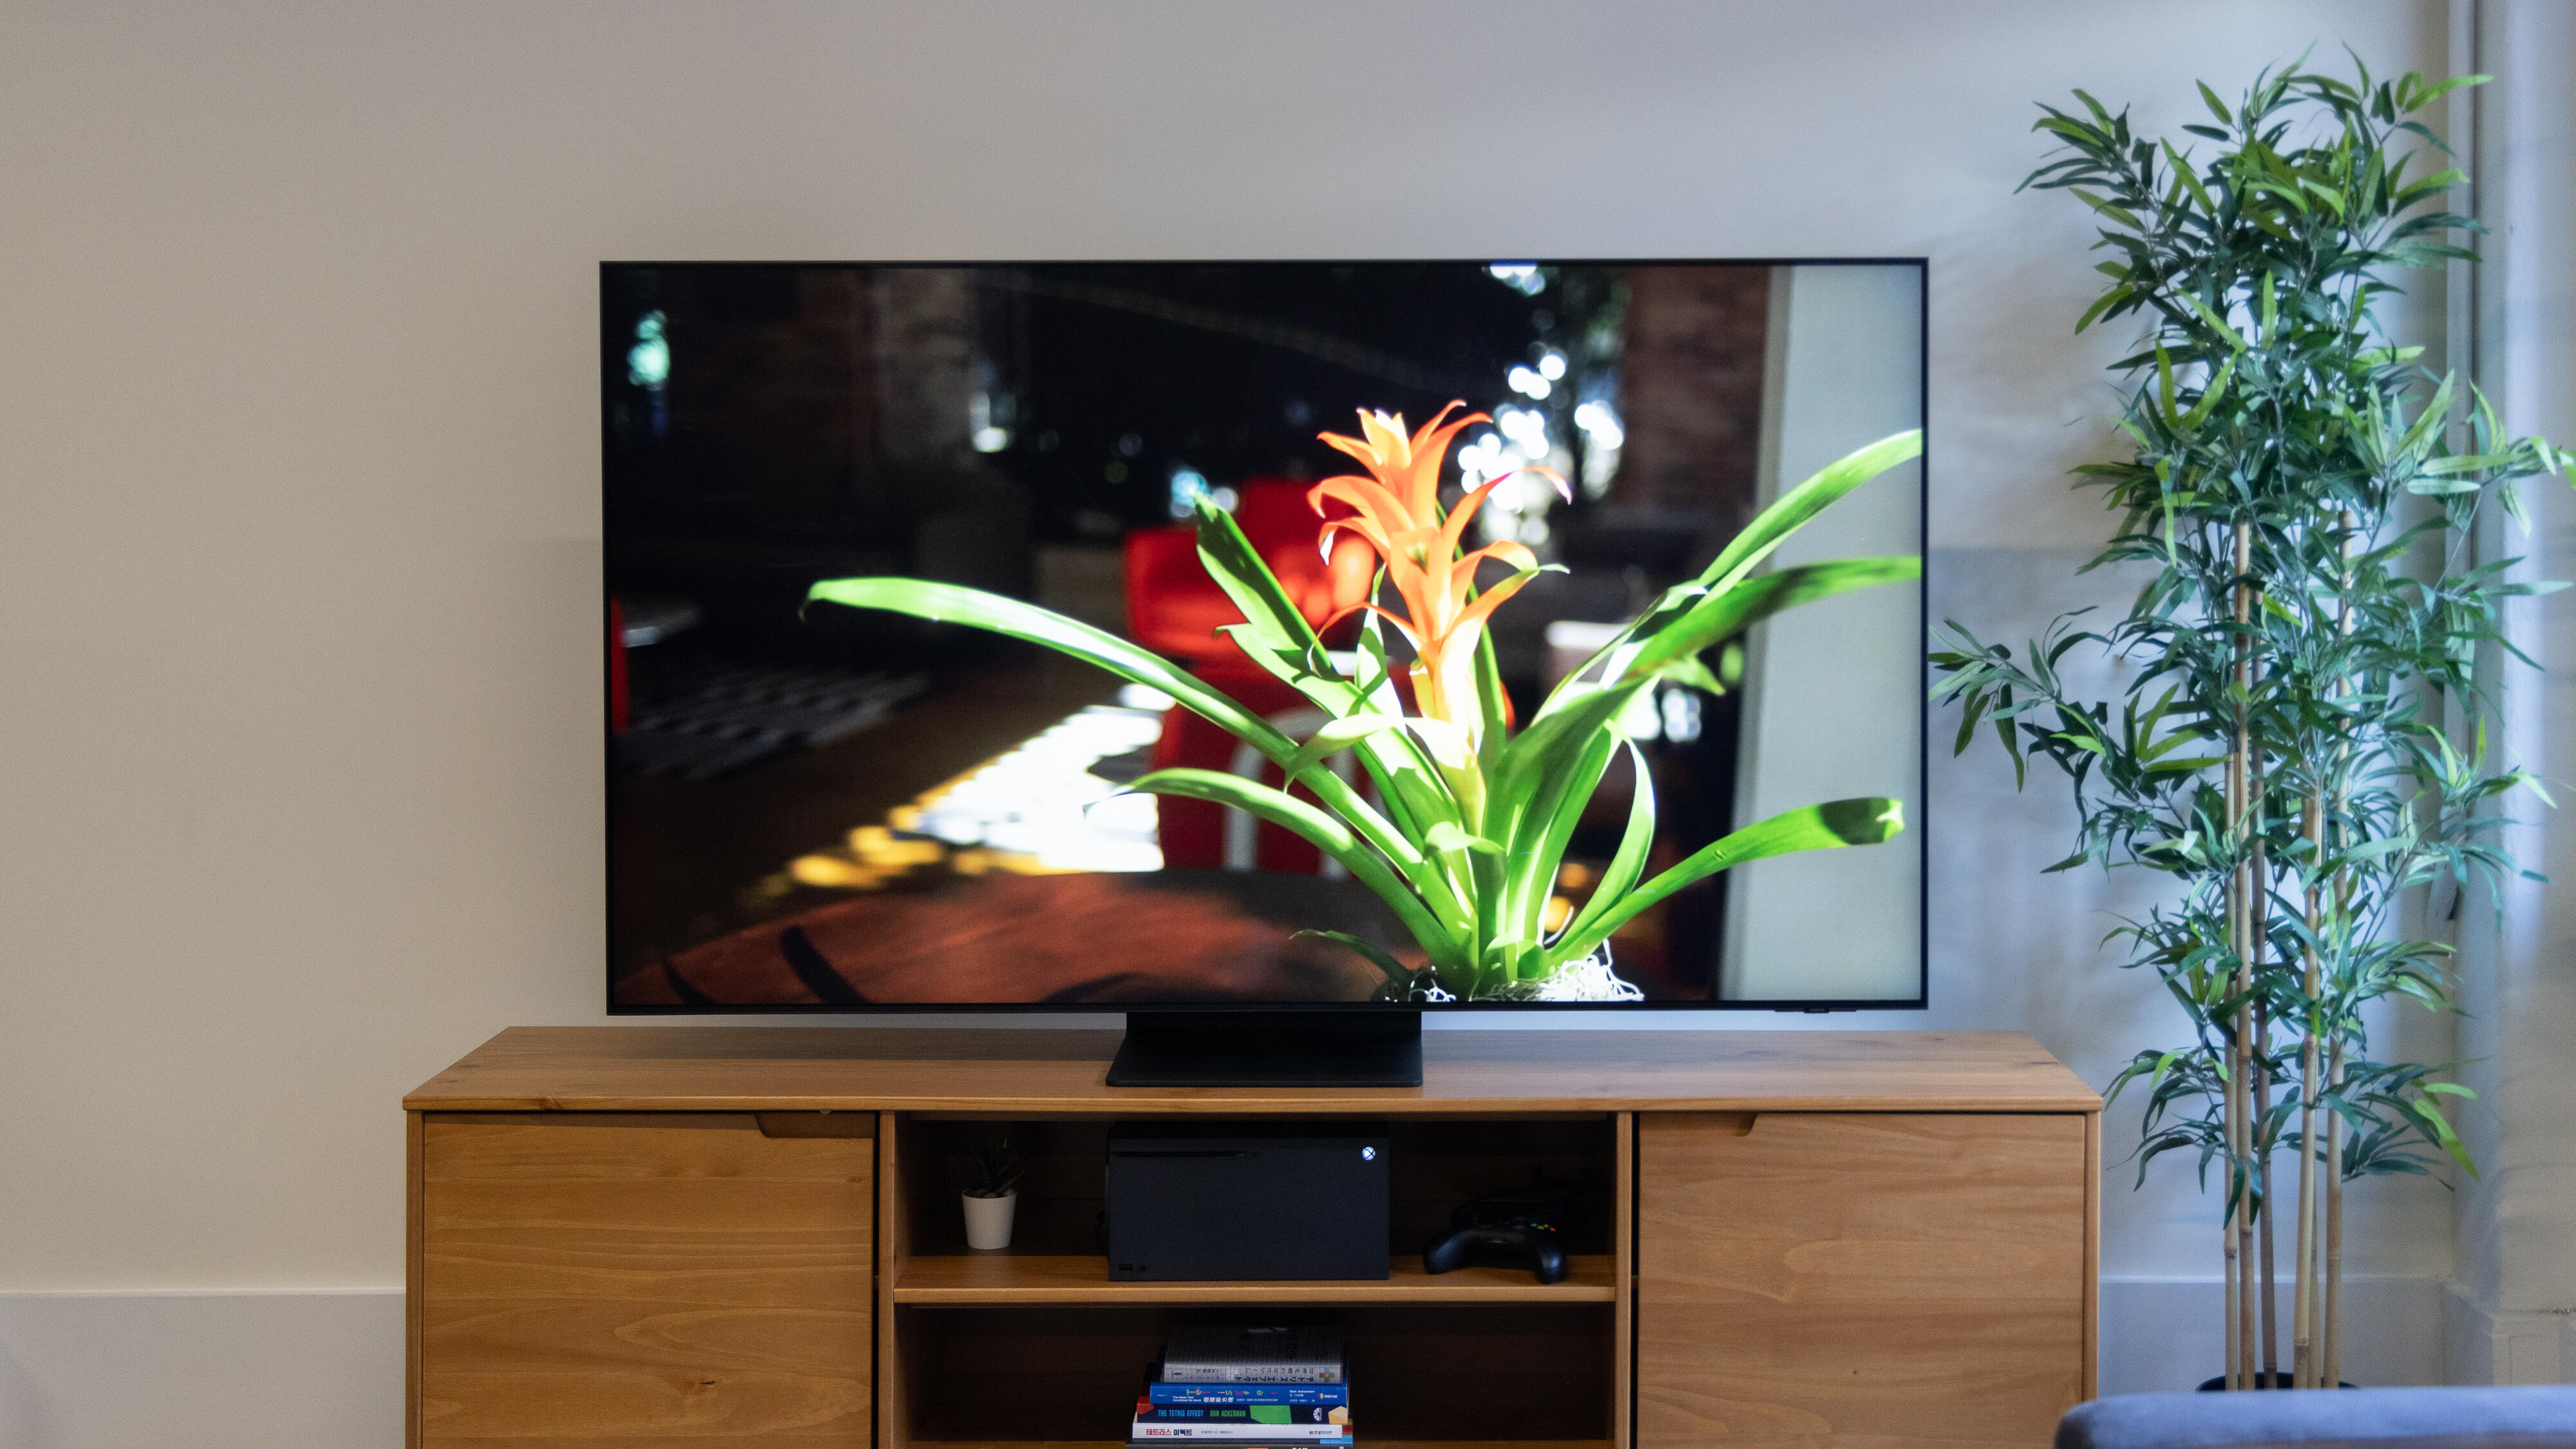 Hisense U8K Review: Blissful Balance of TV Picture Quality, Size and Price  - CNET